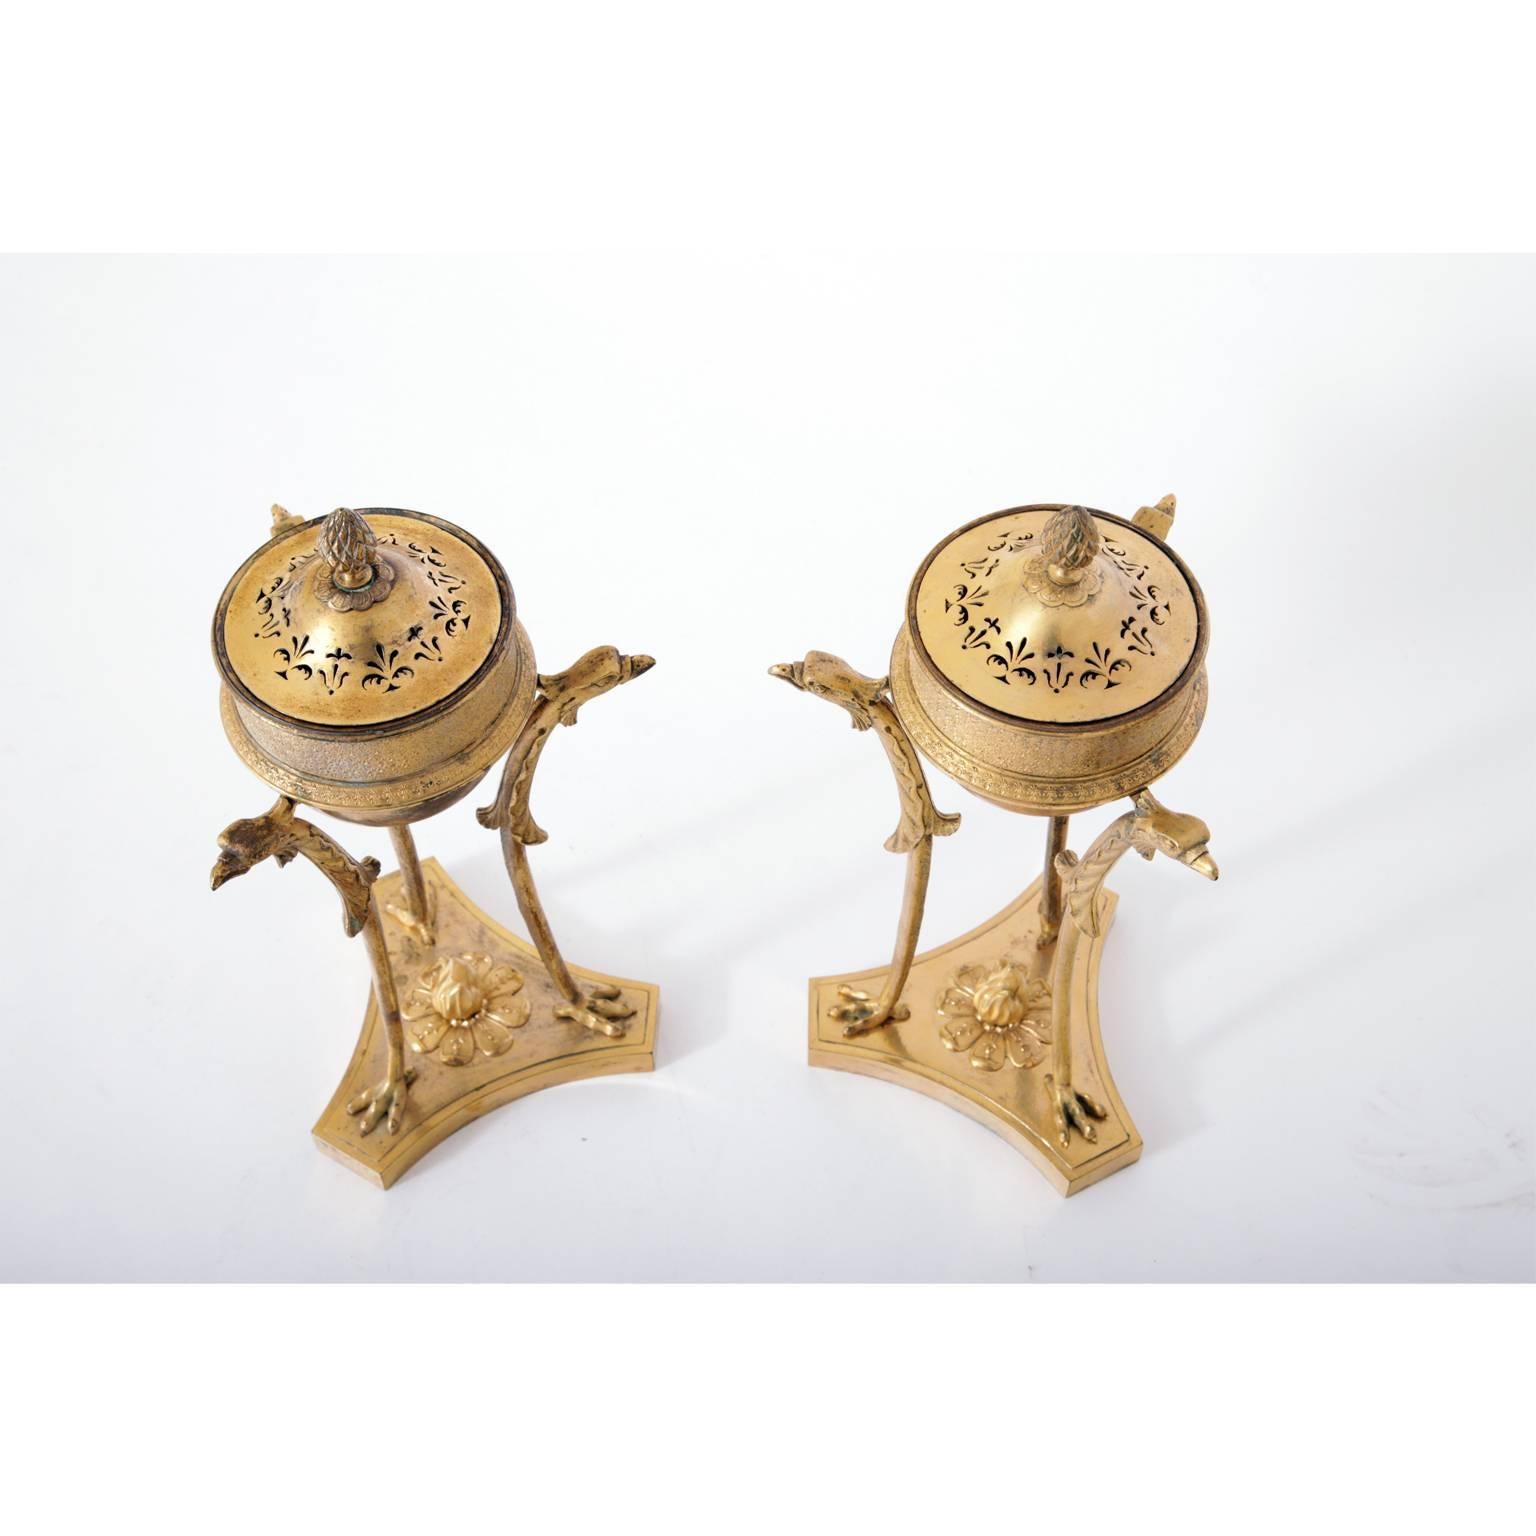 Pair of bronze tripod insense burners à la Athénienne on a trefoil Stand. The burner pot is held up by eagle-shaped legs with claw feet above a torchflame.